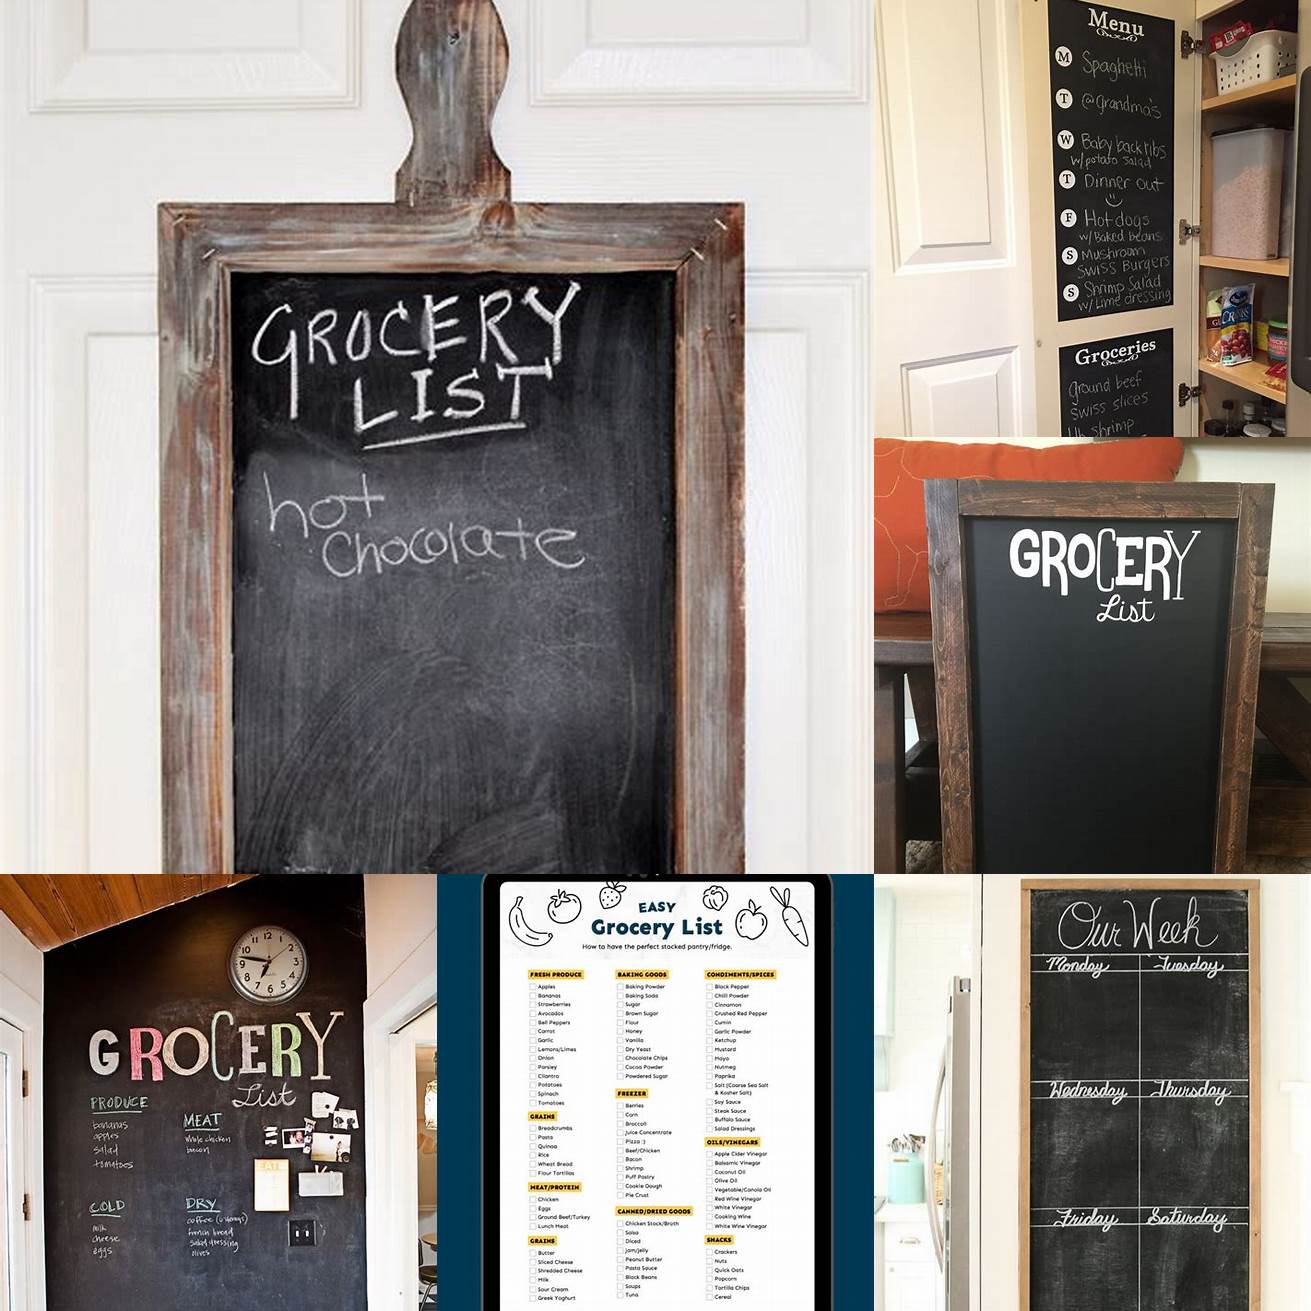 2 Grocery List The kitchen chalkboard is also a great place to write down your grocery list As you run out of items during the week you can add them to the list on the board This makes it easy to see what needs to be purchased during your next grocery run